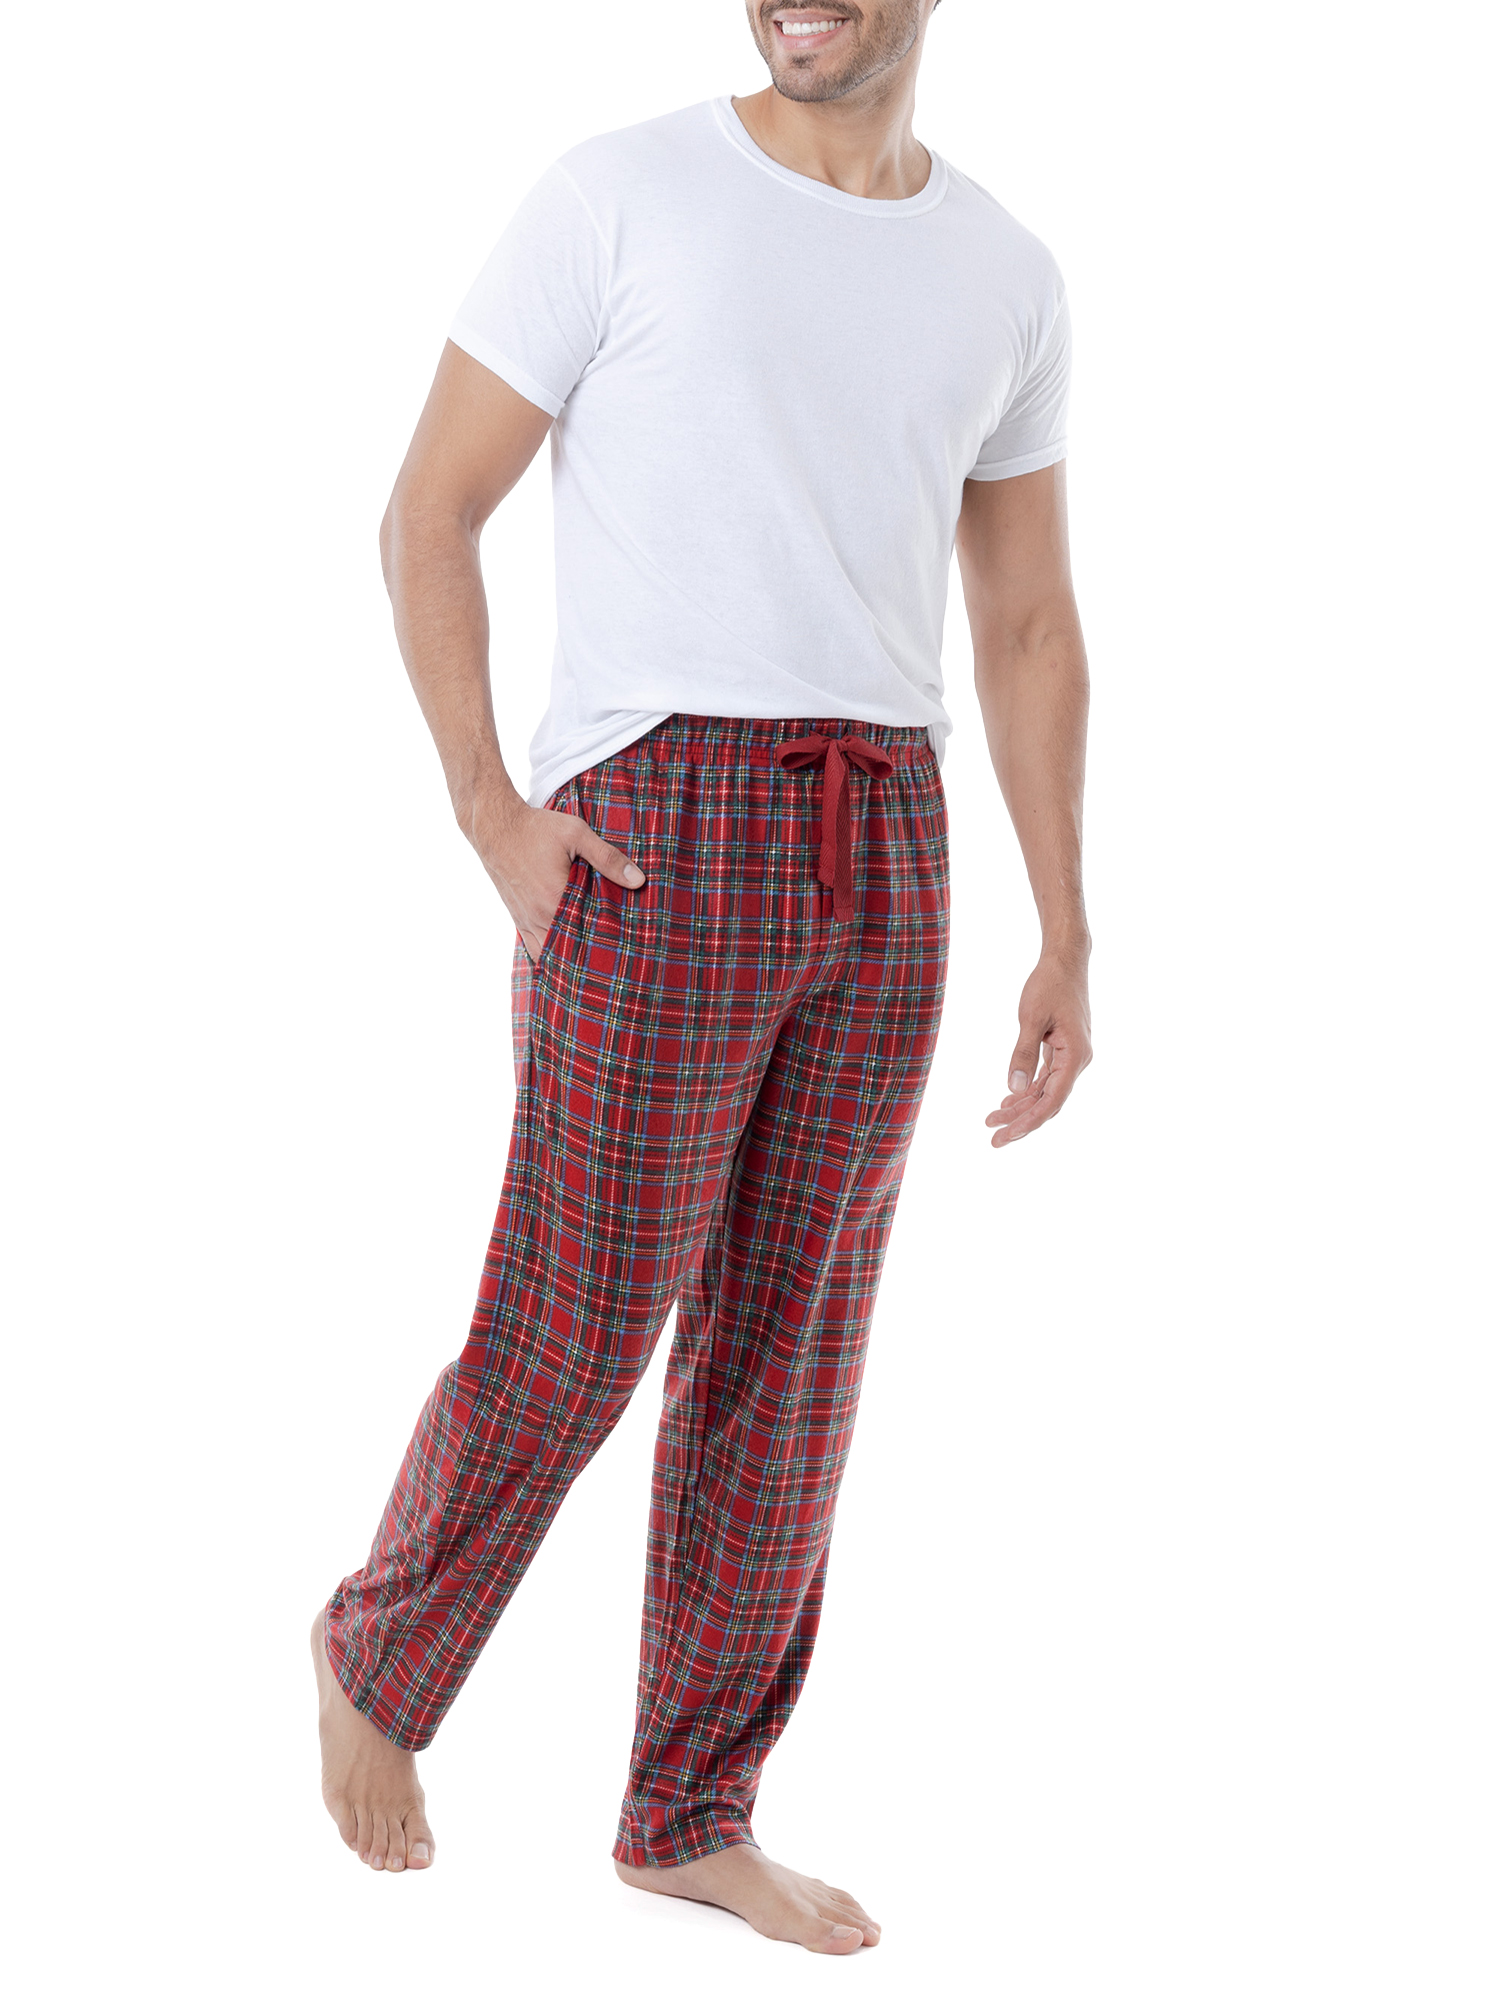 Fruit of the Loom Men's Holiday and Plaid Print Soft Microfleece Pajama Pant 2-Pack Bundle - image 2 of 15